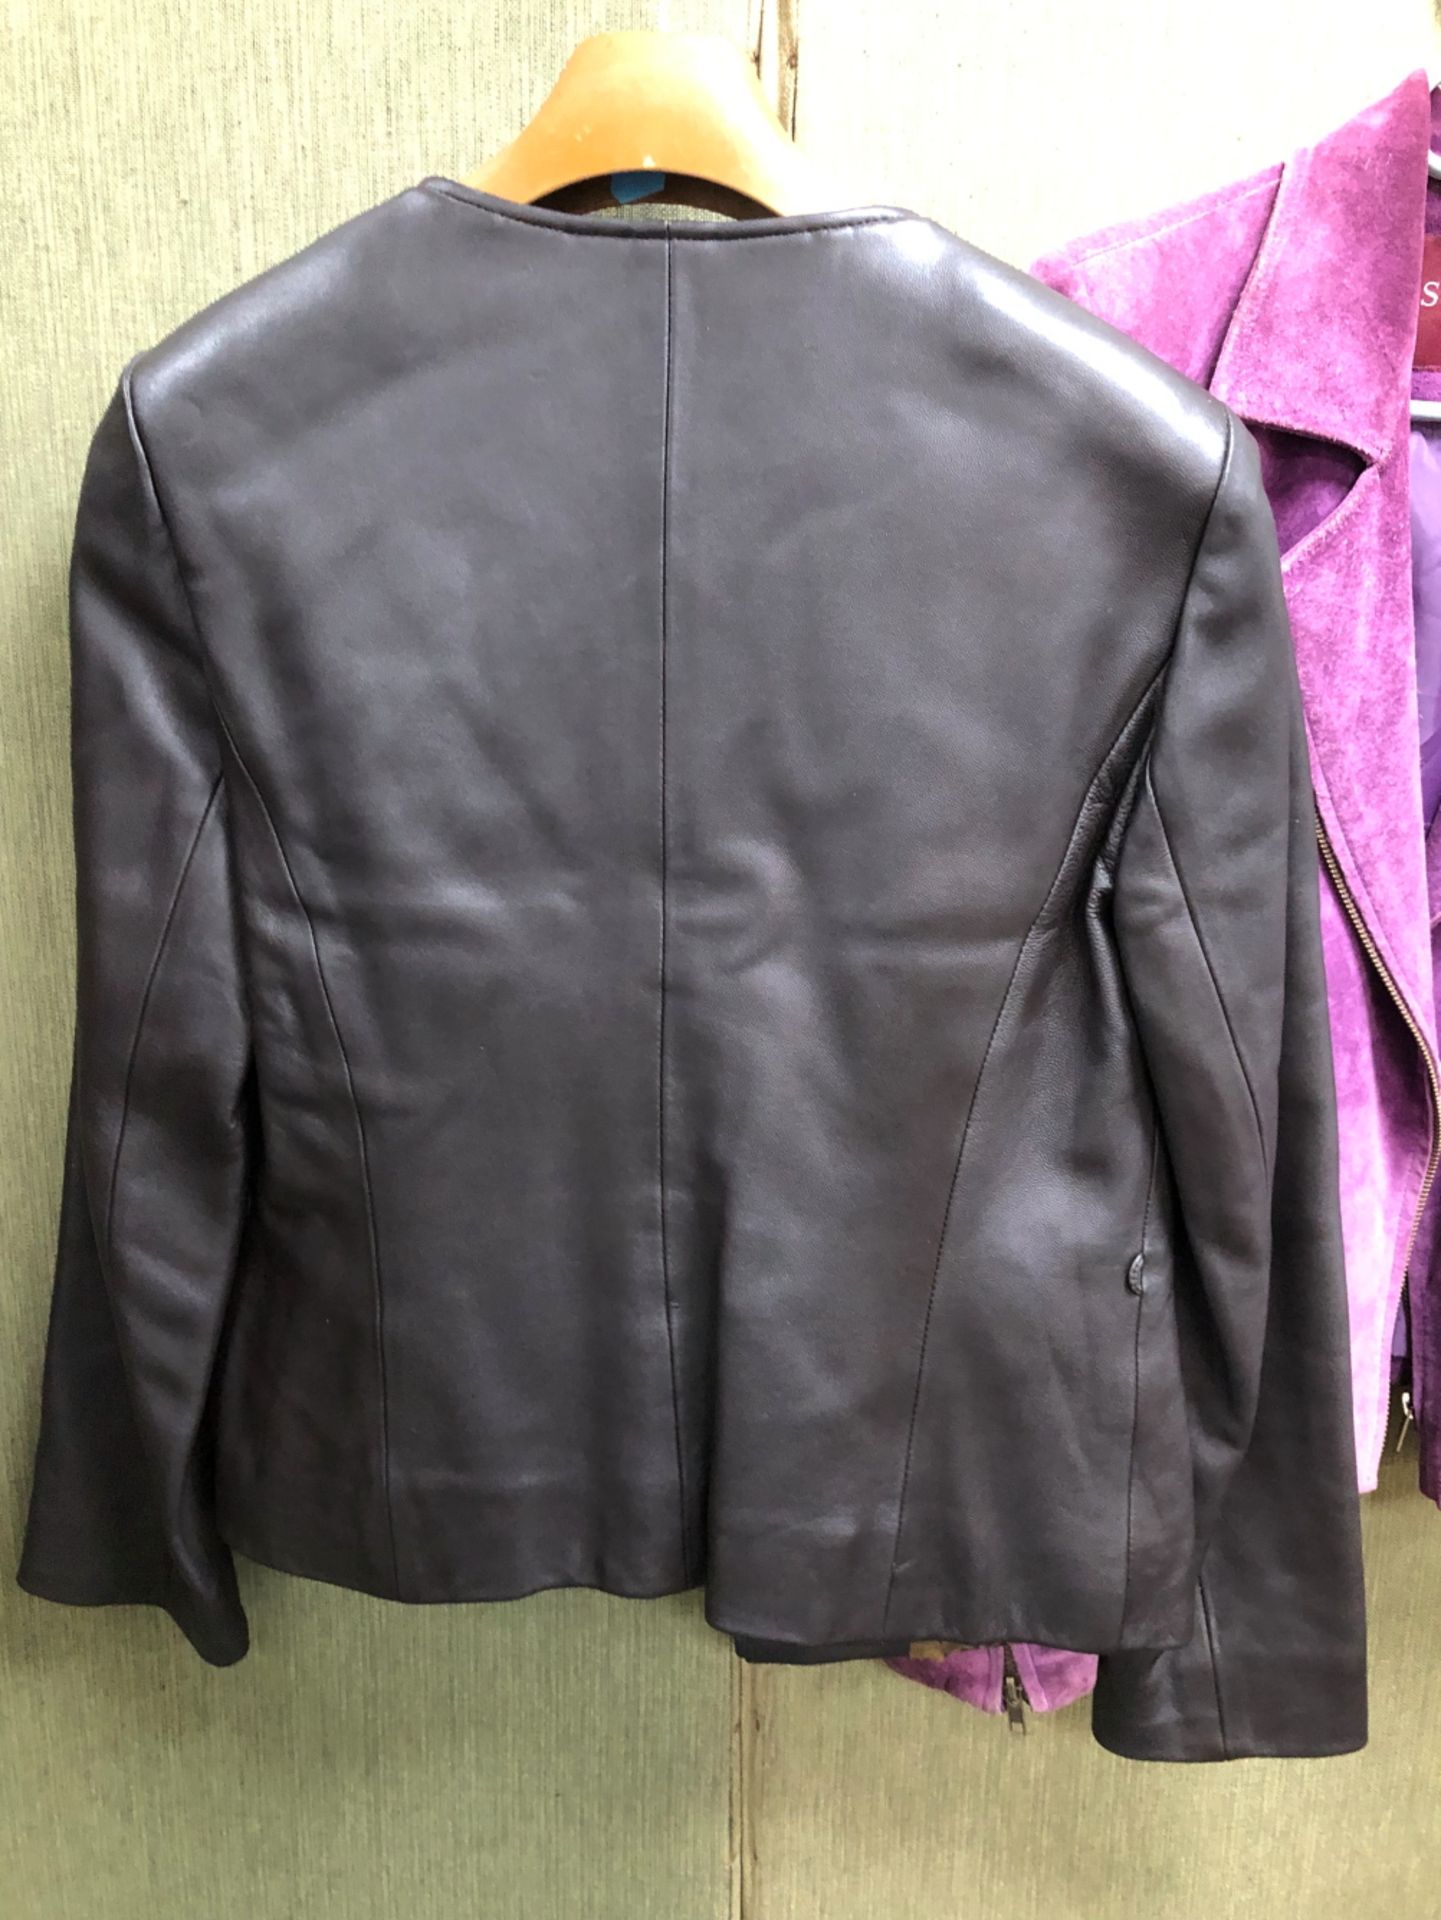 JACKETS. A SECOND SKIN PURPLE SUEDE JACKET SIZE 12, TOGETHER WITH A DARK BROWN COUNTRY CASUALS - Image 9 of 10